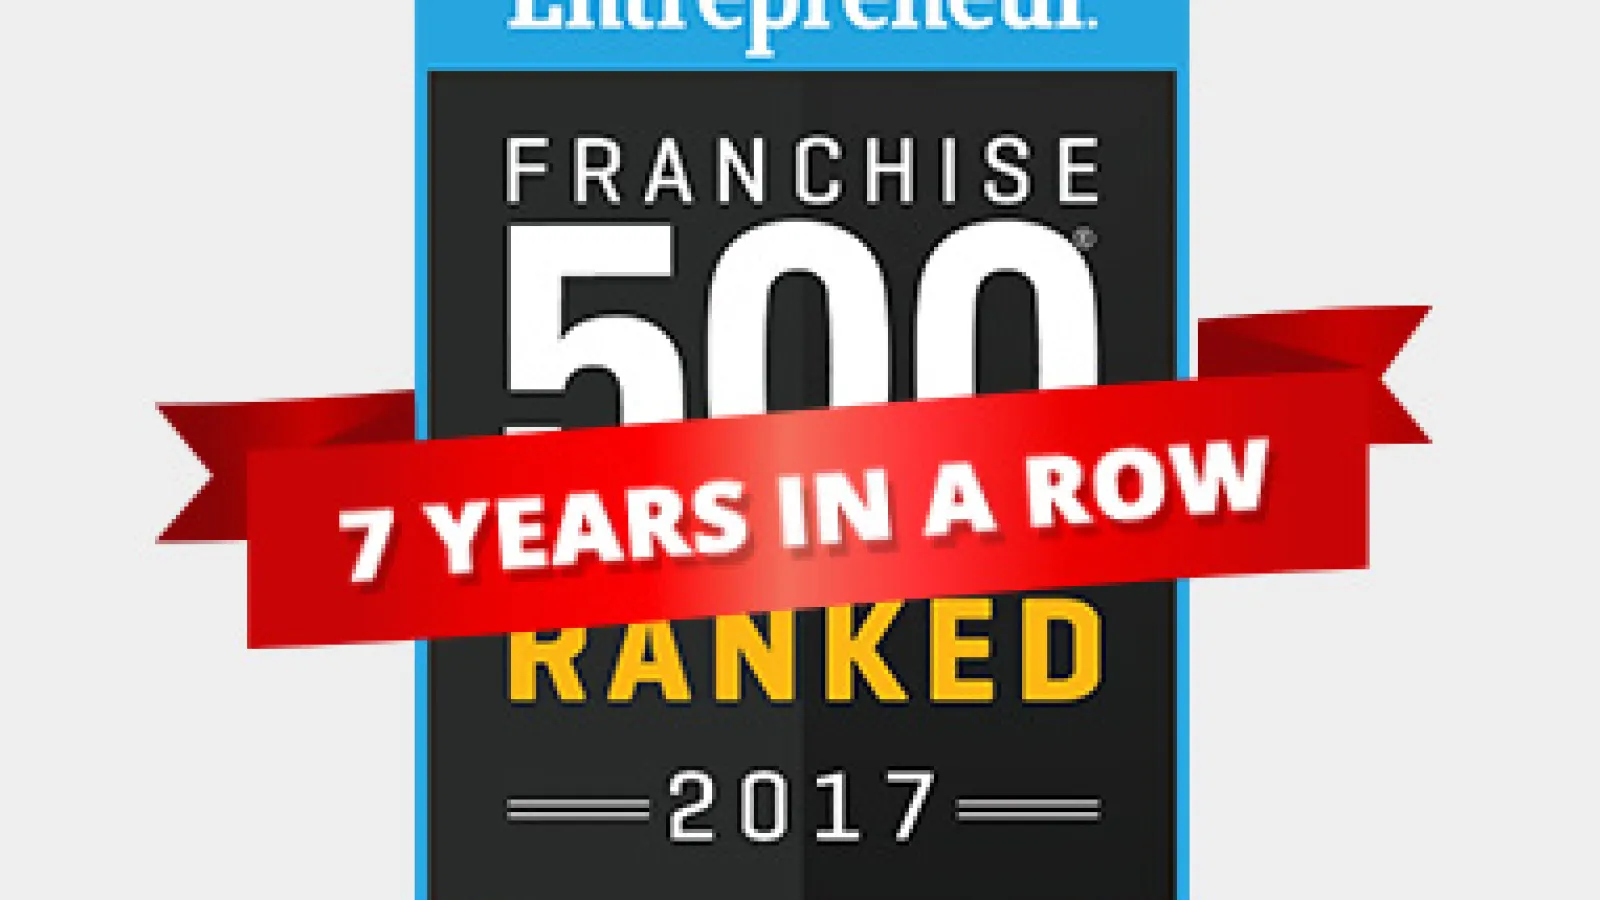 Entrepreneur Magazine's 2017 Franchise 500® List Recognizes Sir Grout as One of the Leading Home Improvement Franchises for the Seventh Year in a Row